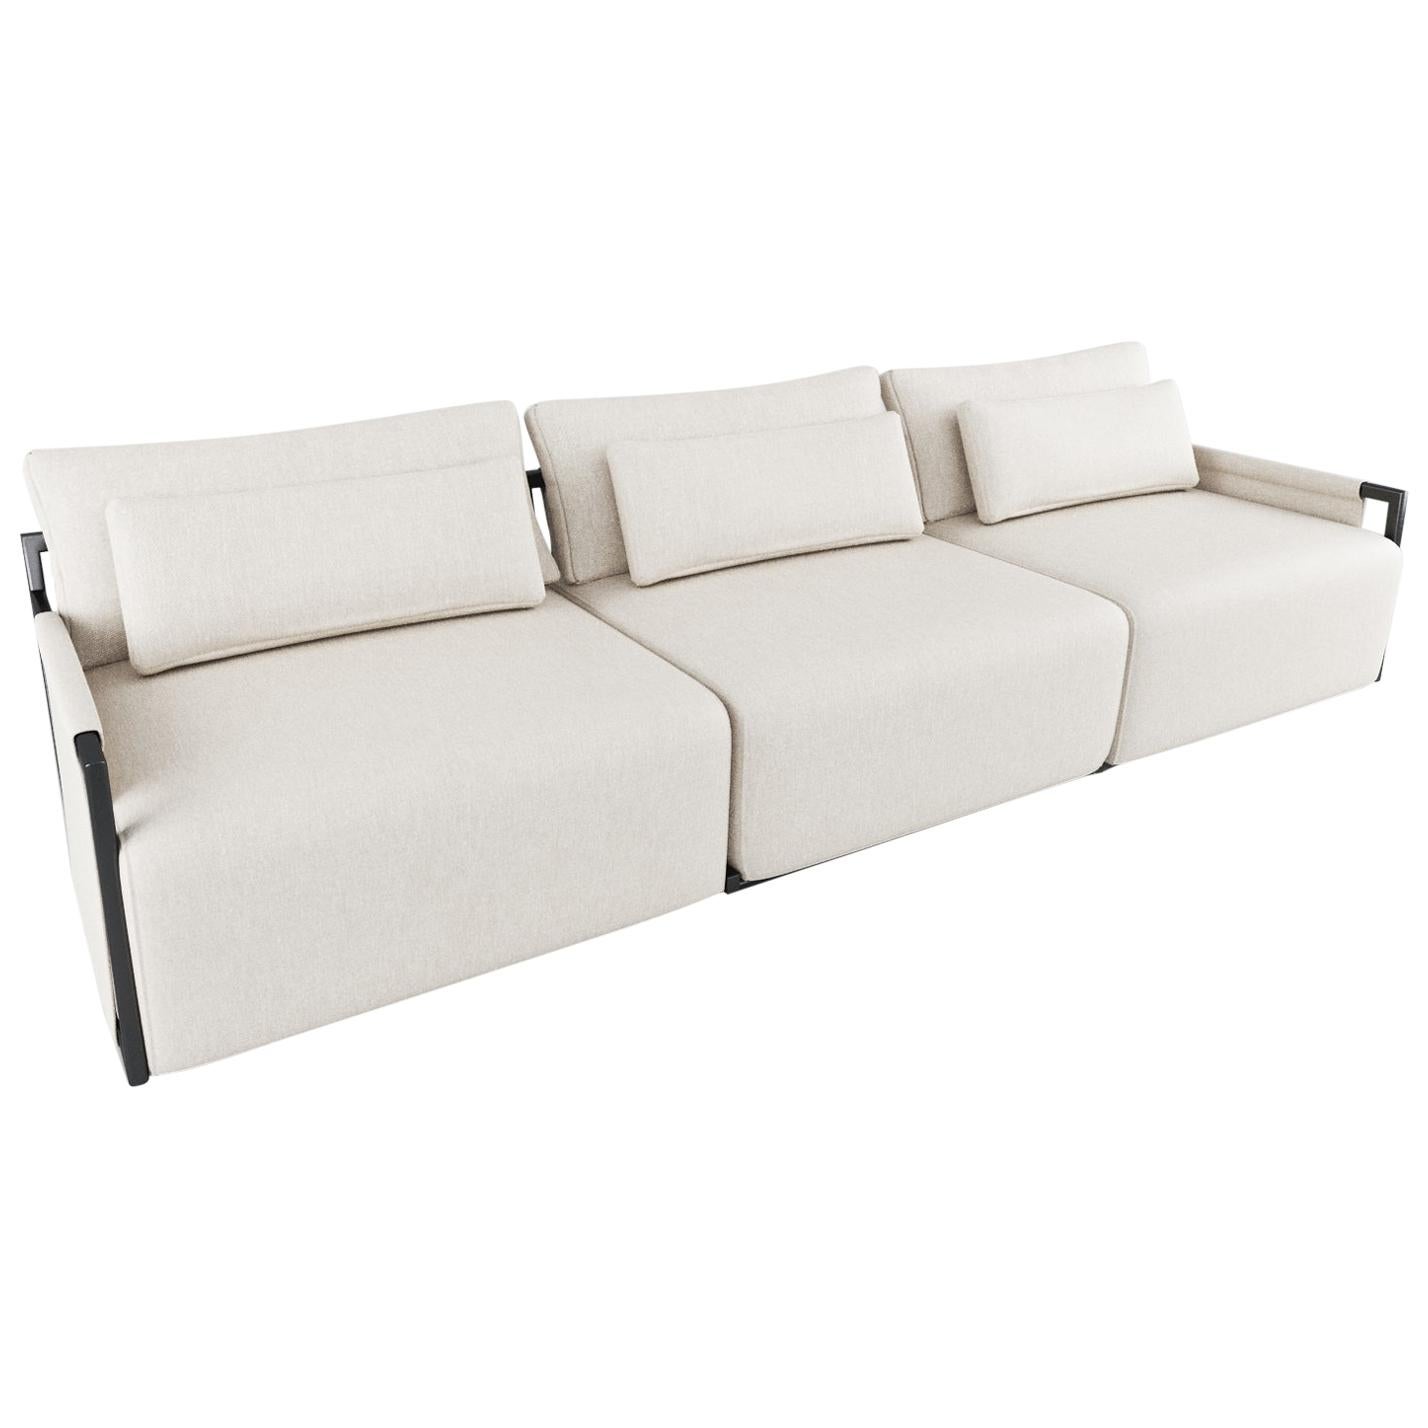 Sectional Sofa Home, Offwhite Fabric and Black Metal For Sale